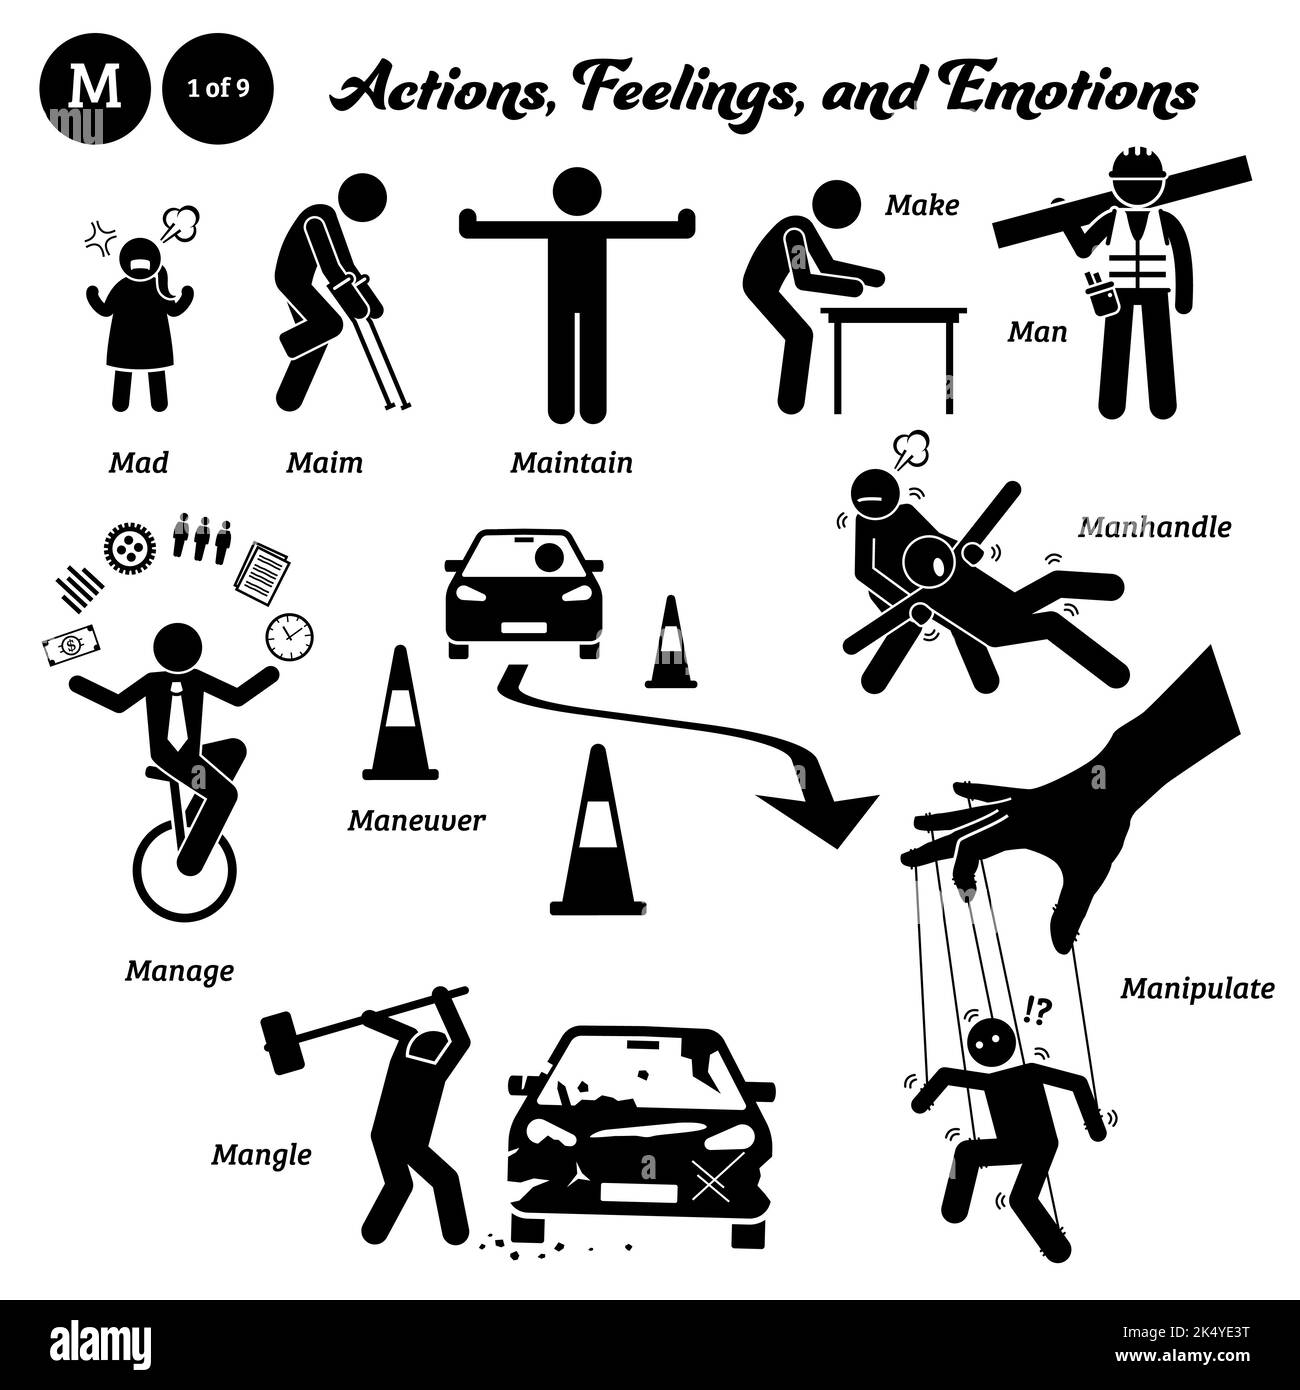 Stick figure human people man action, feelings, and emotions icons alphabet M. Mad, maim, maintain, make, man, manage, maneuver, manhandle, mangle, an Stock Vector